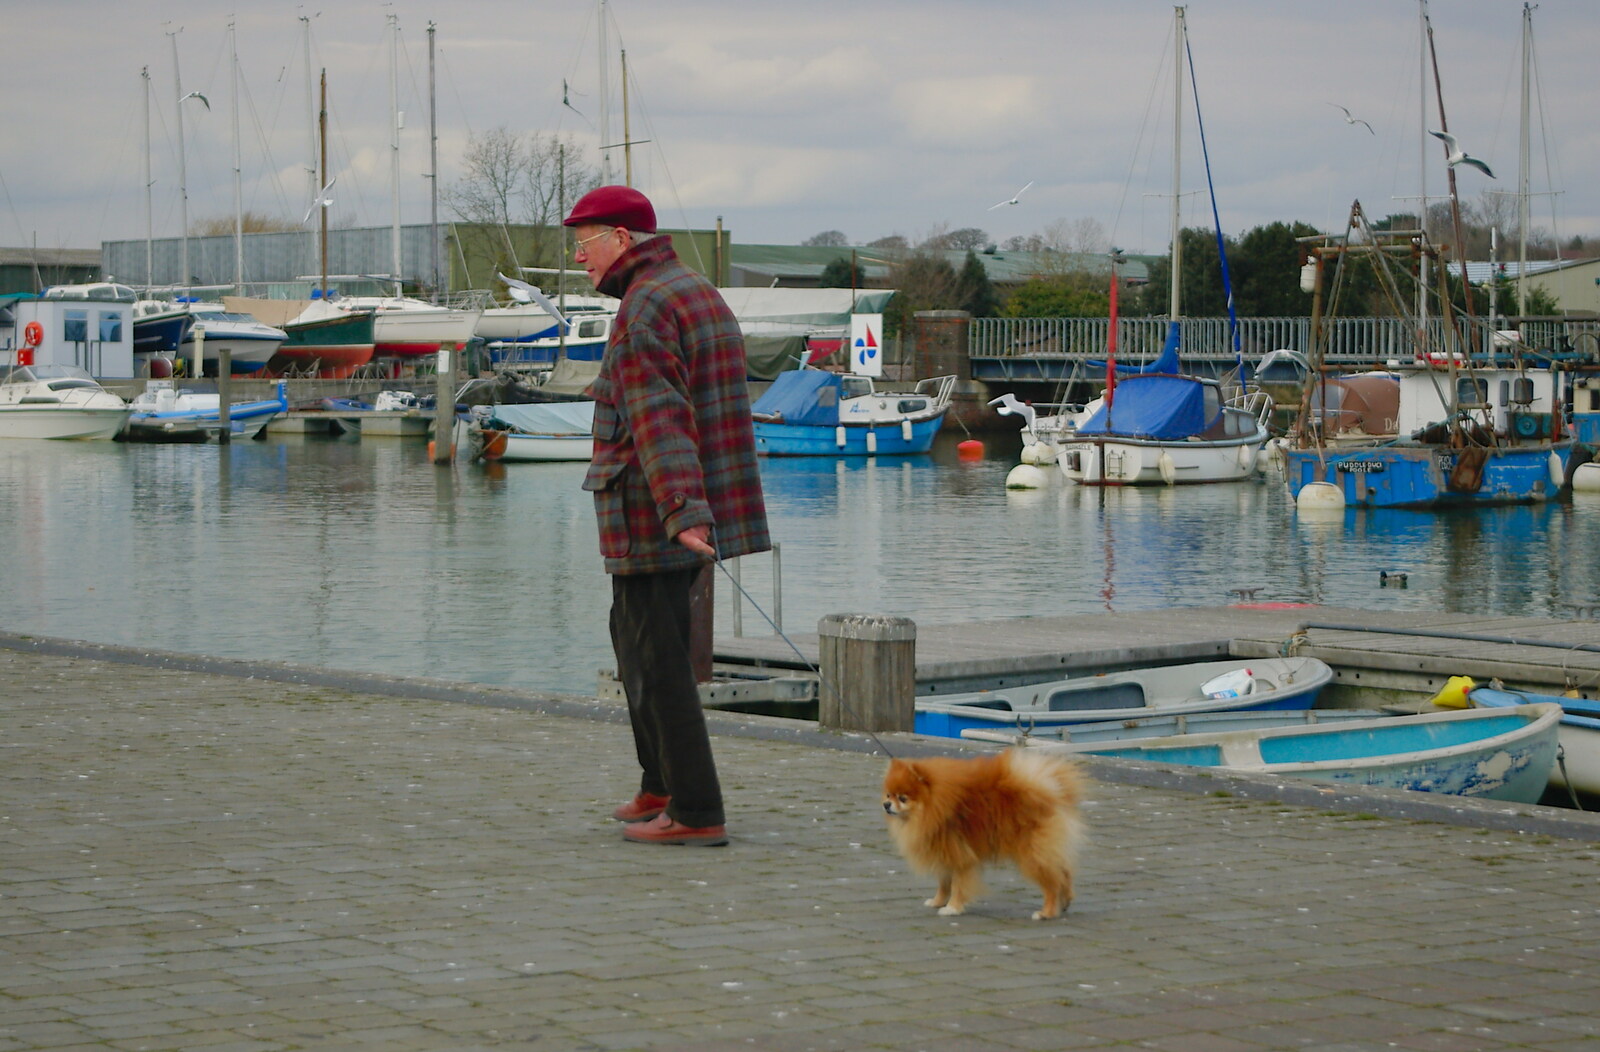 A small fluffy dog on Lymington Quay from A Walk Around Lymington, and Luke Leaves Qualcomm Cambridge - 13th March 2005